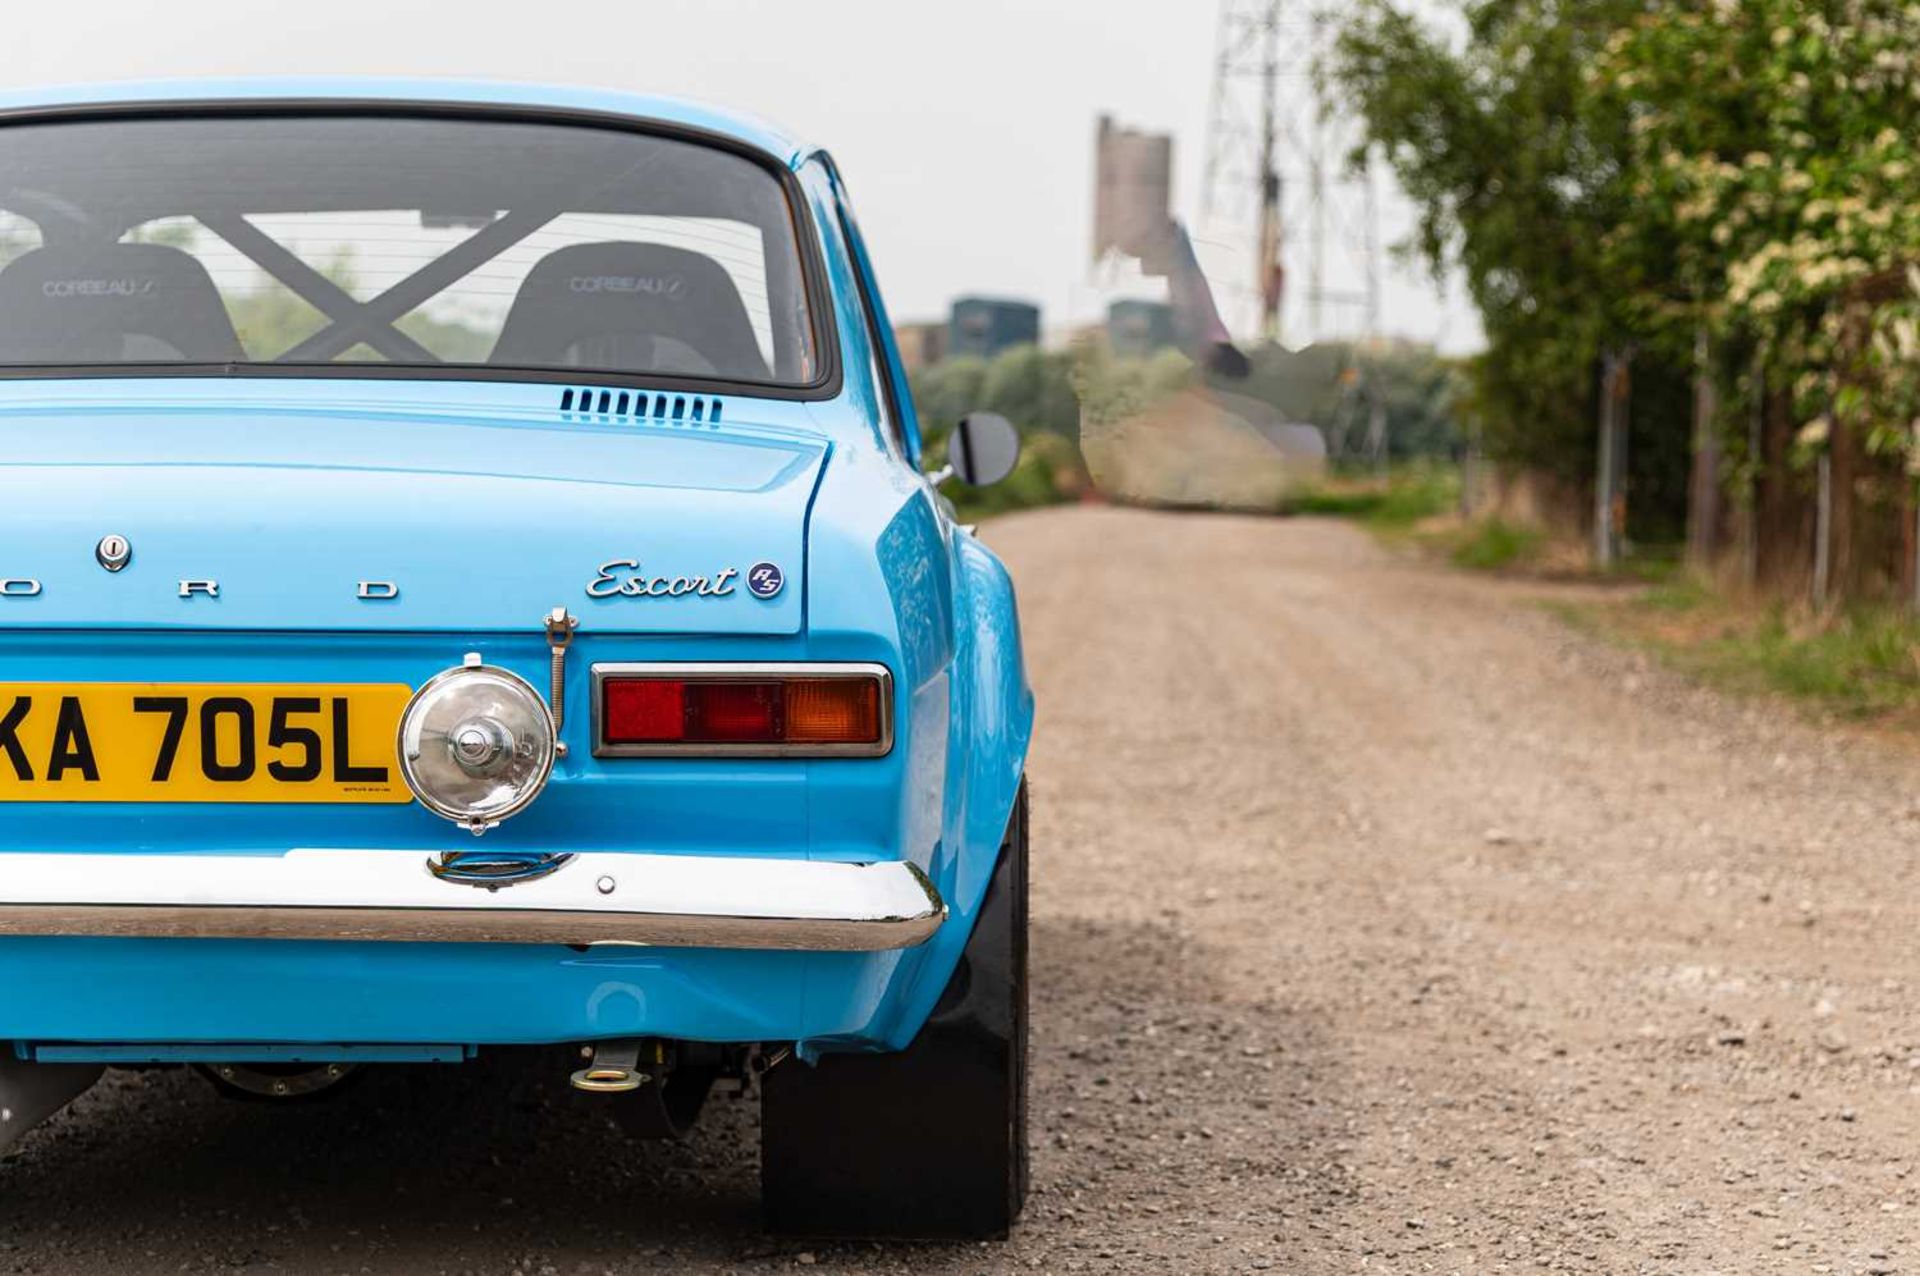 1973 Ford Escort RS1600 The ultimate no-expense-spared build to historic GP4 rally specification, fi - Image 24 of 84